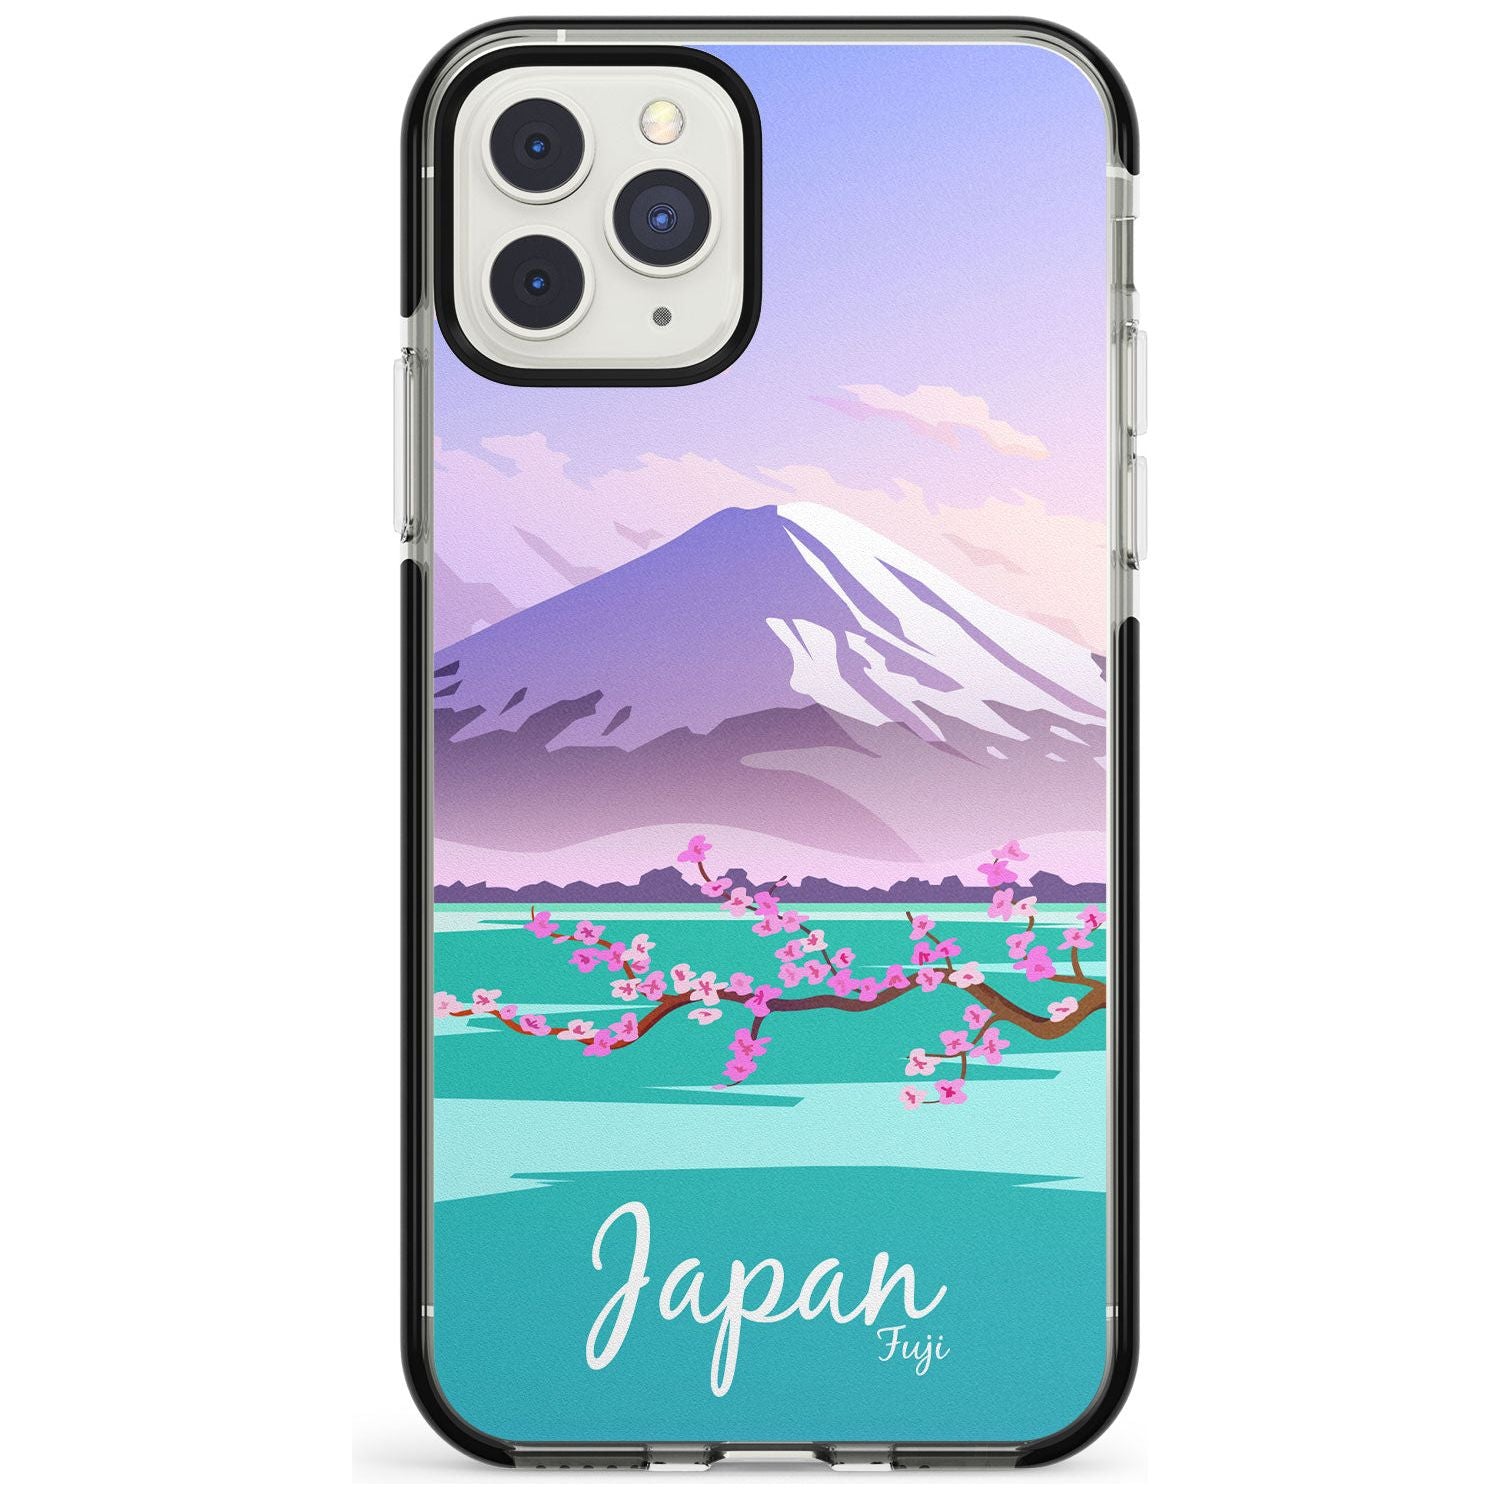 Vintage Travel Poster Japan Black Impact Phone Case for iPhone 11 Pro Max